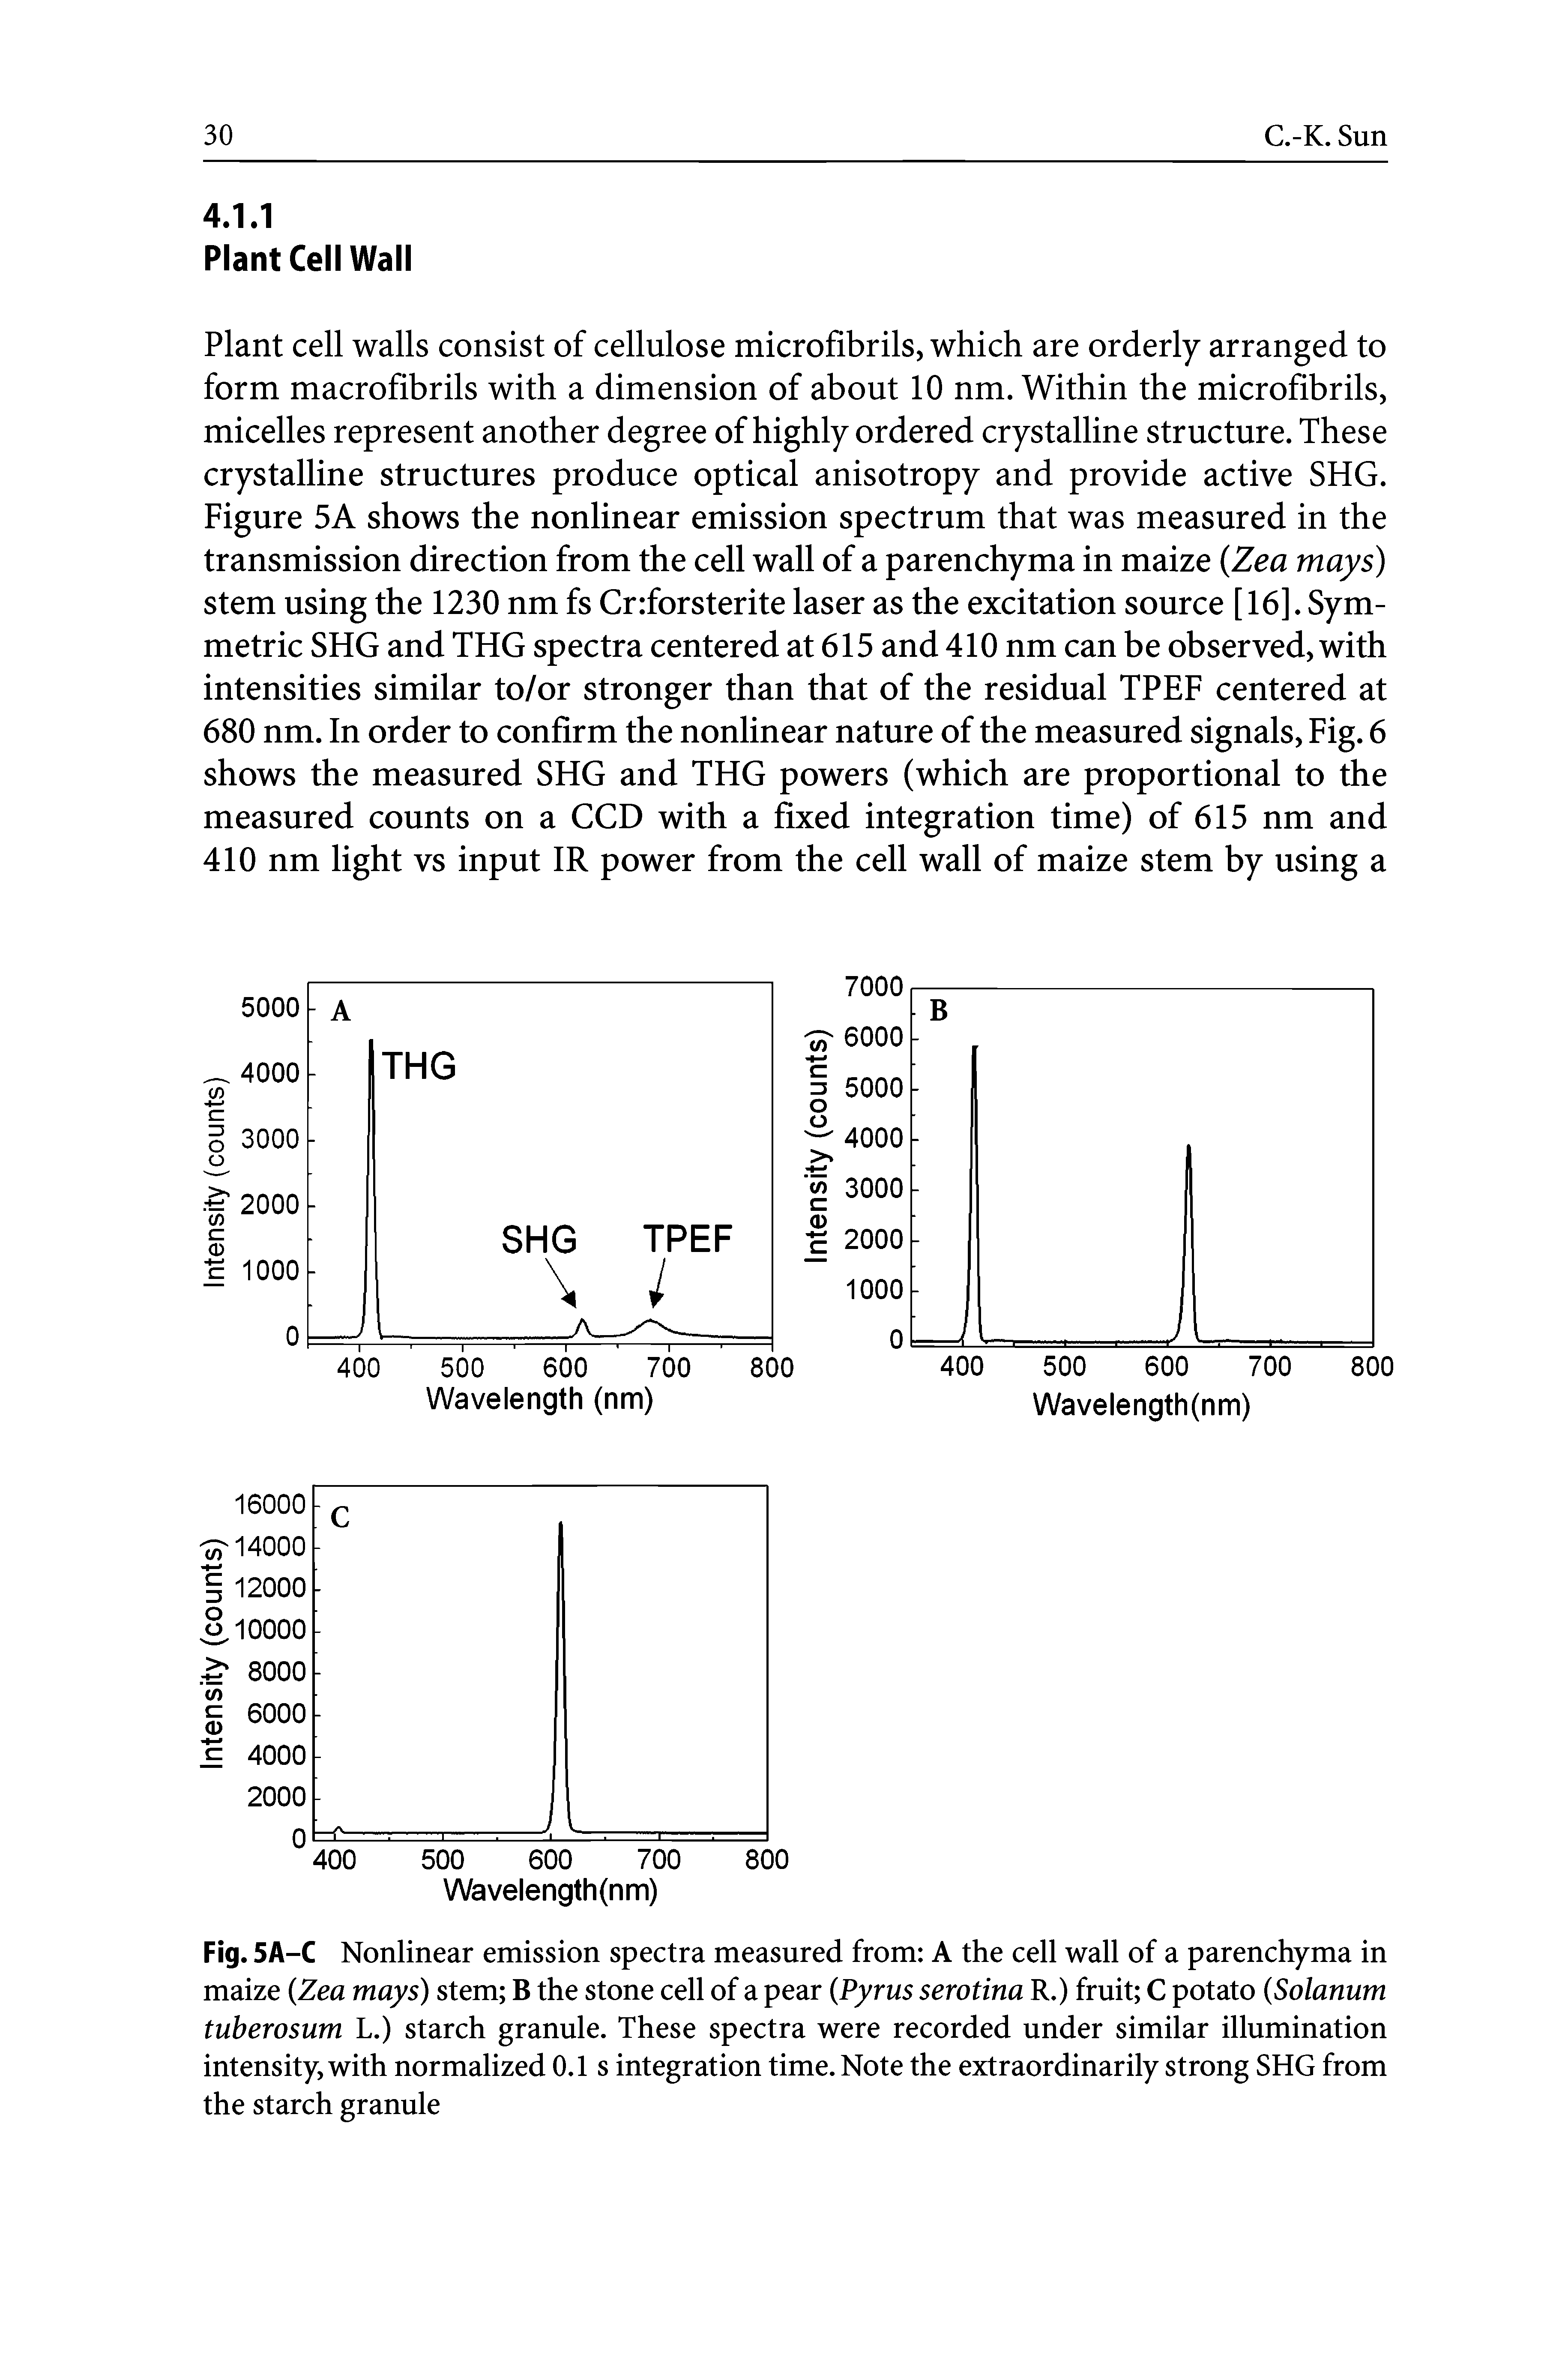 Fig. 5A-C Nonlinear emission spectra measured from A the cell wall of a parenchyma in maize Zea mays) stem B the stone cell of a pear Pyrus serotina R.) fruit C potato Solarium tuberosum L.) starch granule. These spectra were recorded under similar illumination intensity, with normalized 0.1 s integration time. Note the extraordinarily strong SHG from the starch granule...